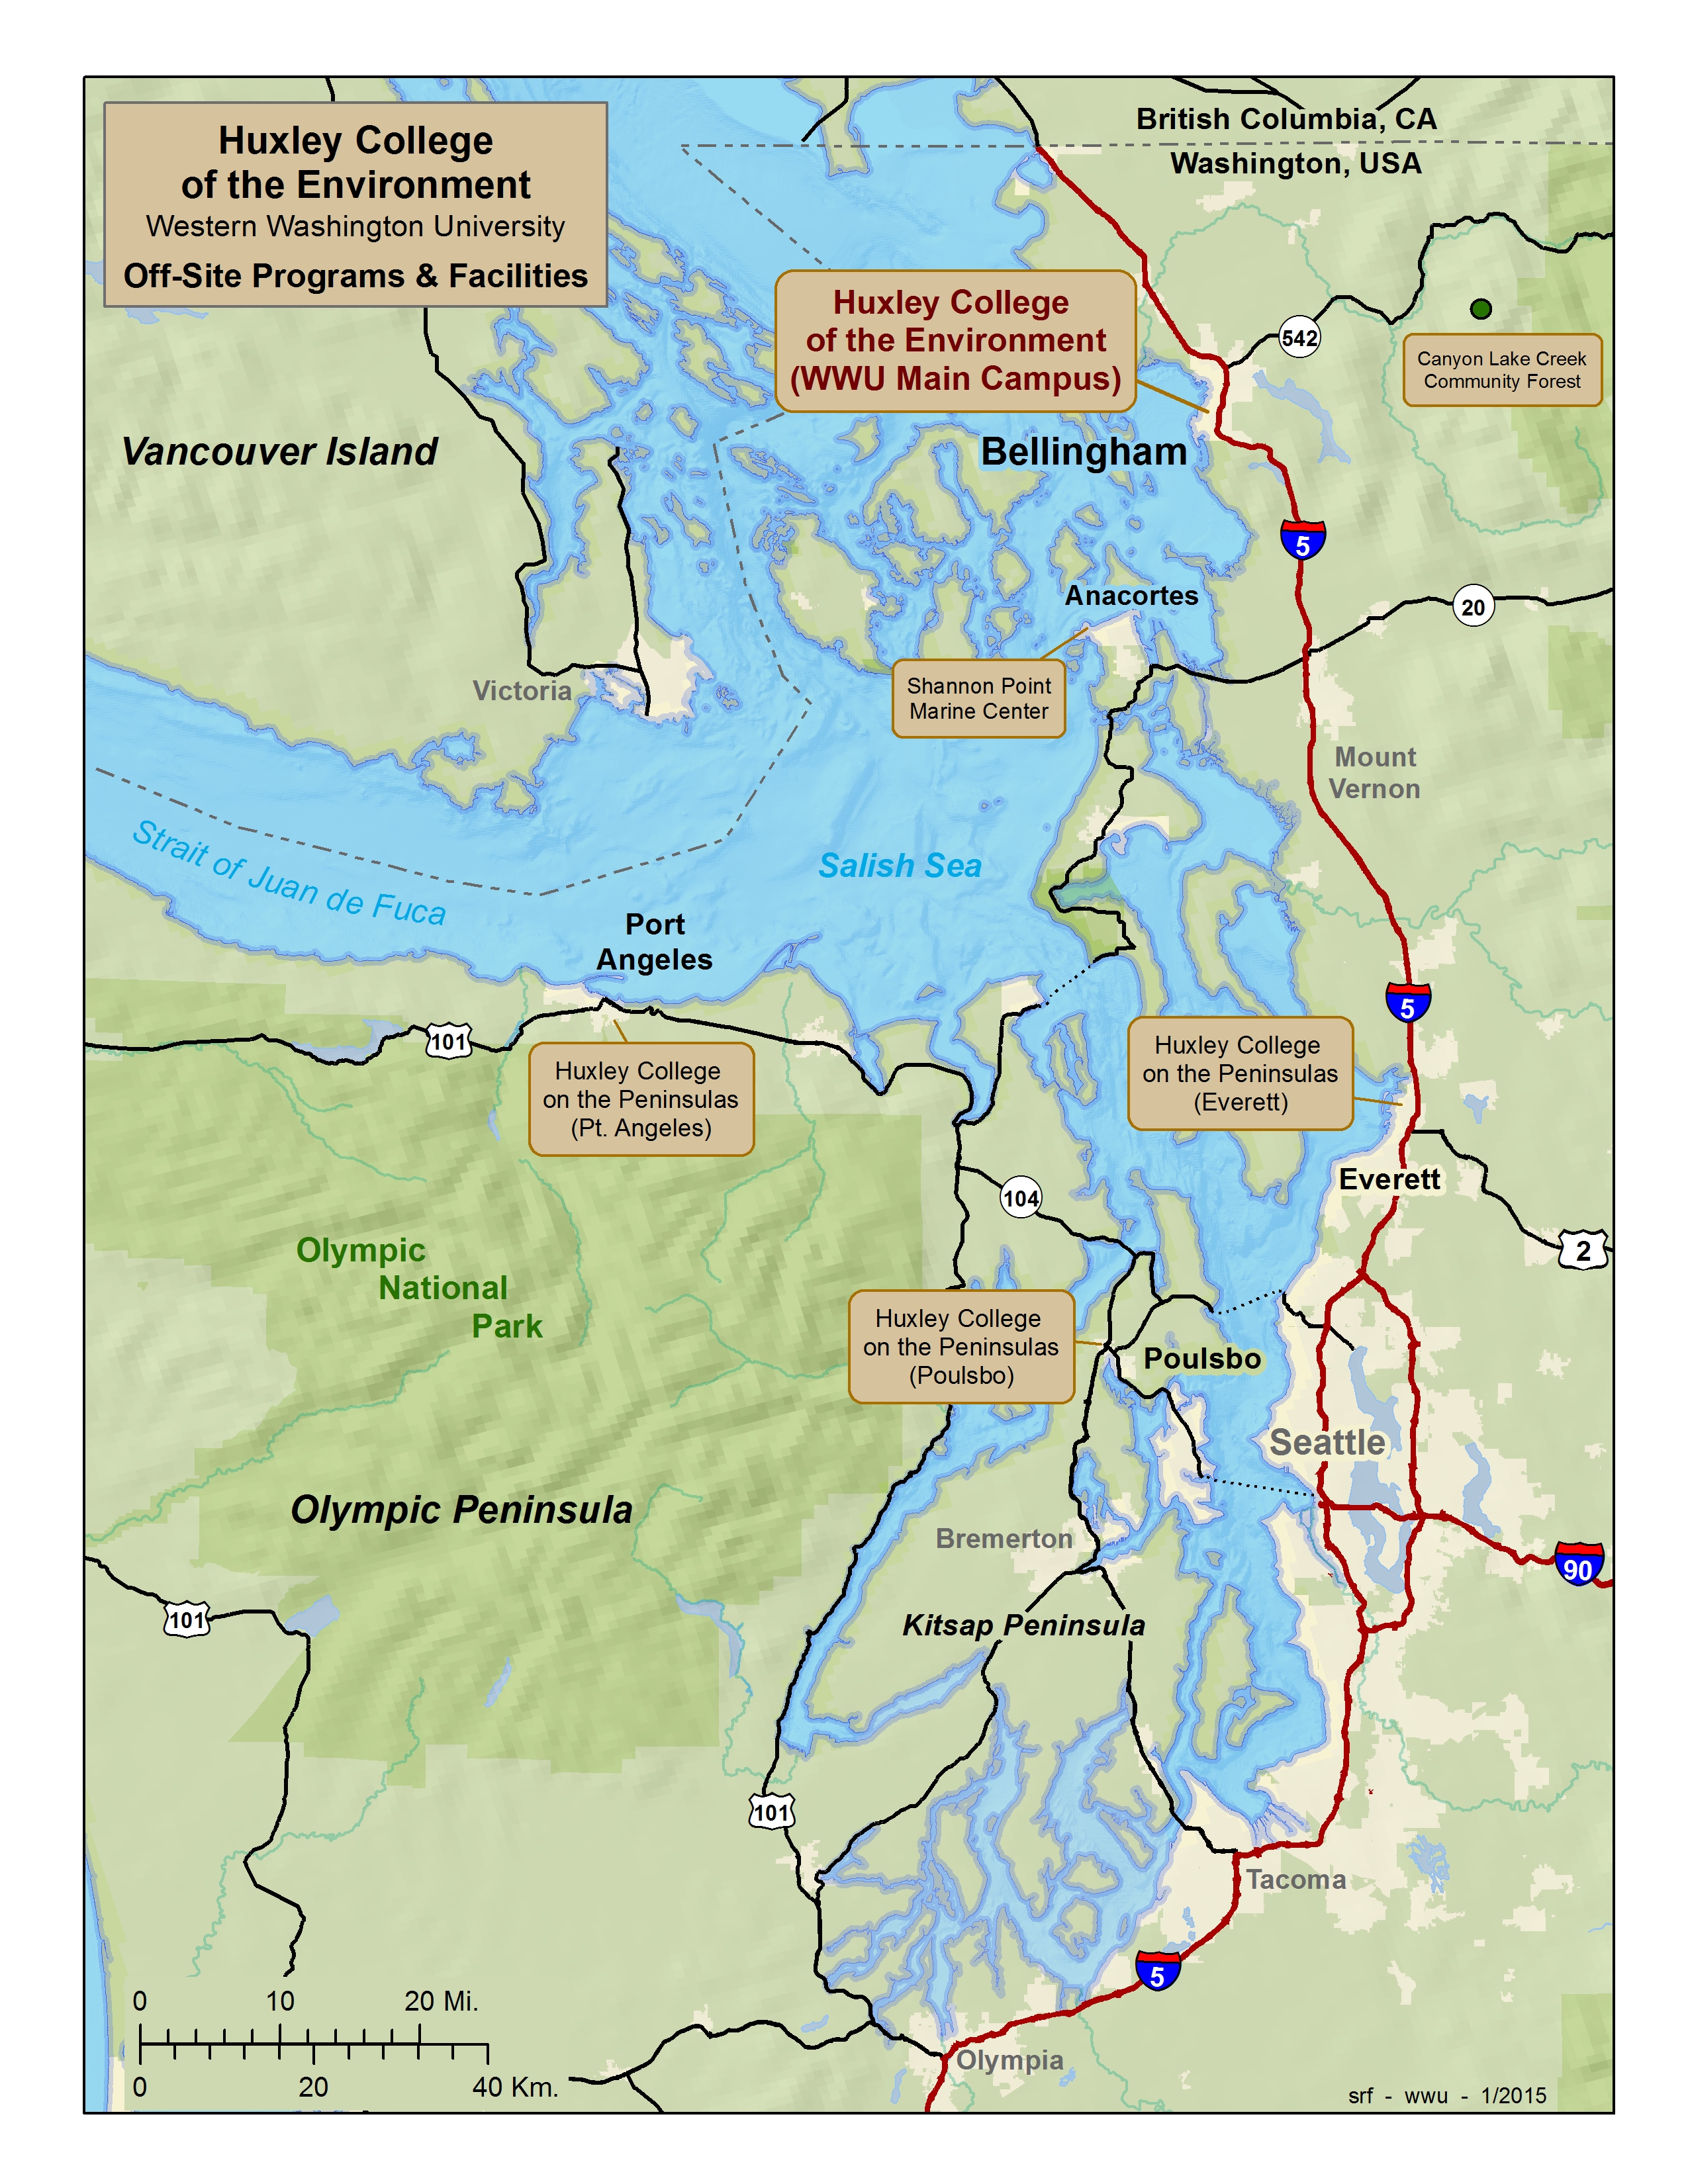 Map of Western Washington highlighting Huxley Colleges and Shannon Point Marine Center